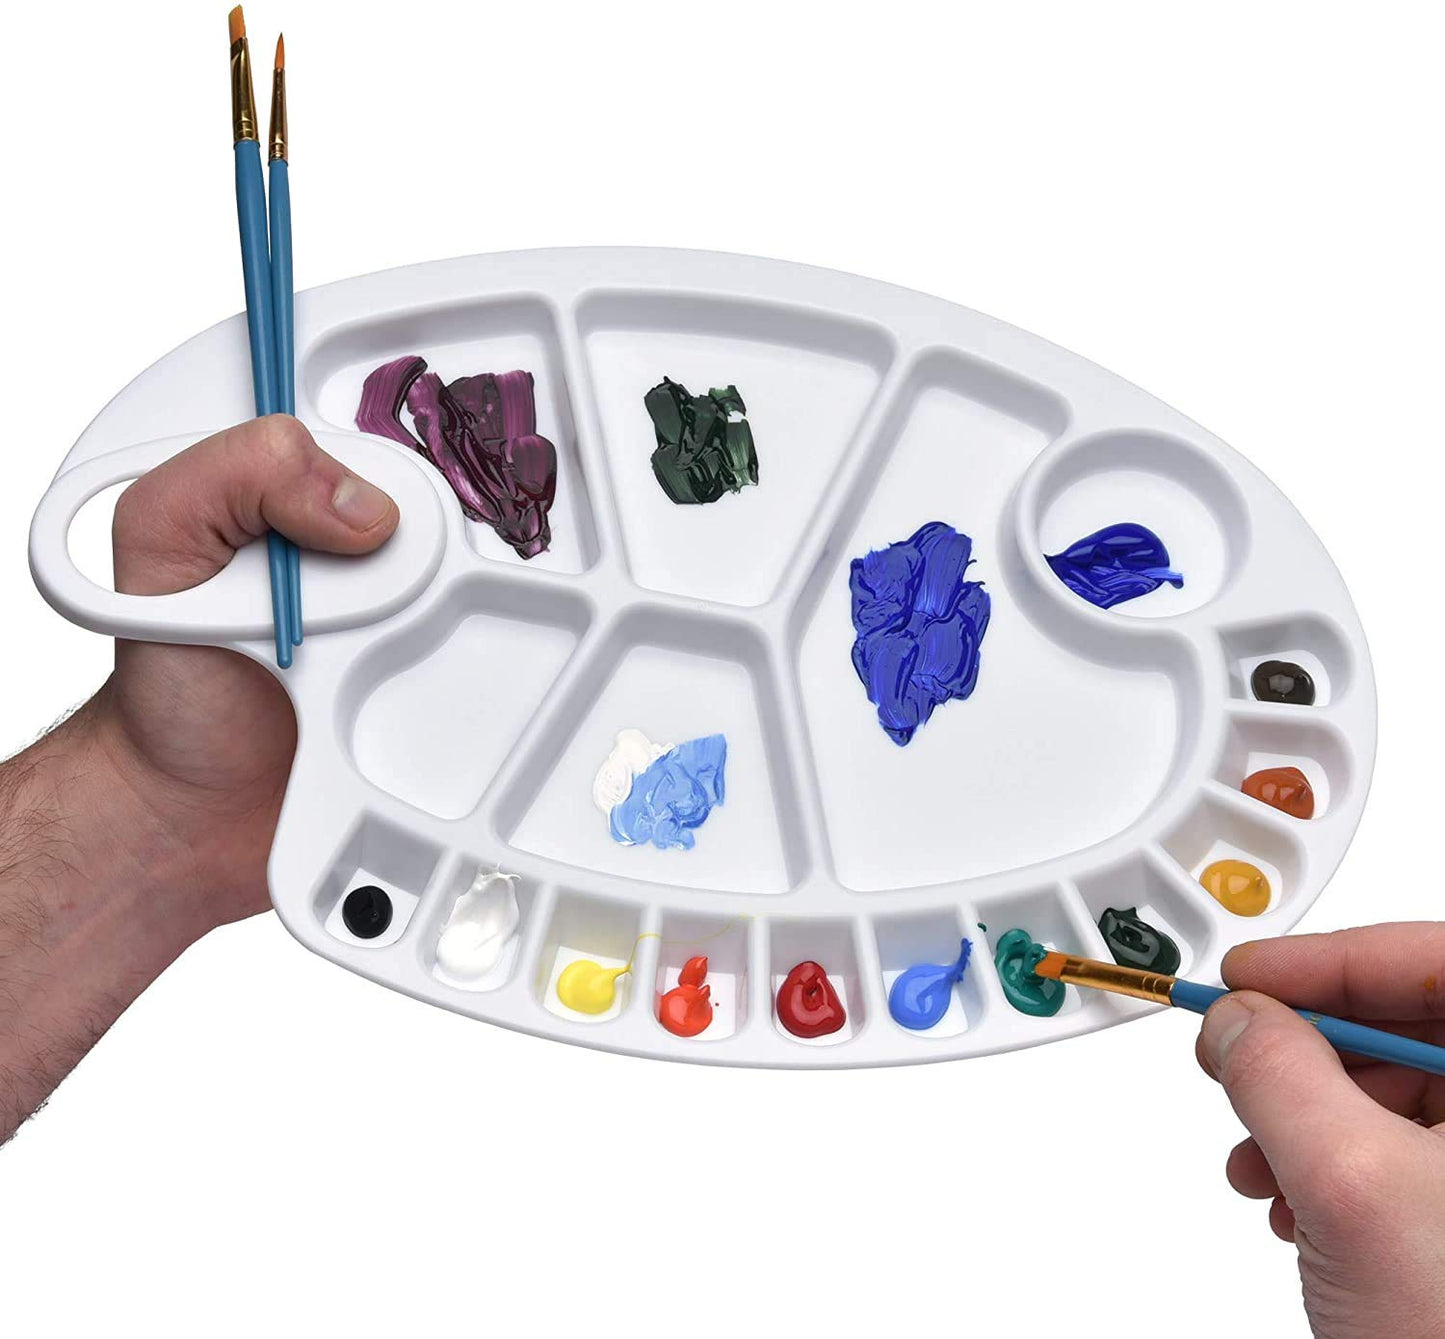 17 Wells Reusable White PVC Plastic Artist Paint Palette 8 x 11.8 Inch Oval Shaped Panel Painting Pallette Non-Stick Paints Washable with Thumb Hole, Kids or Professional Arts Crafts Painting Supplies